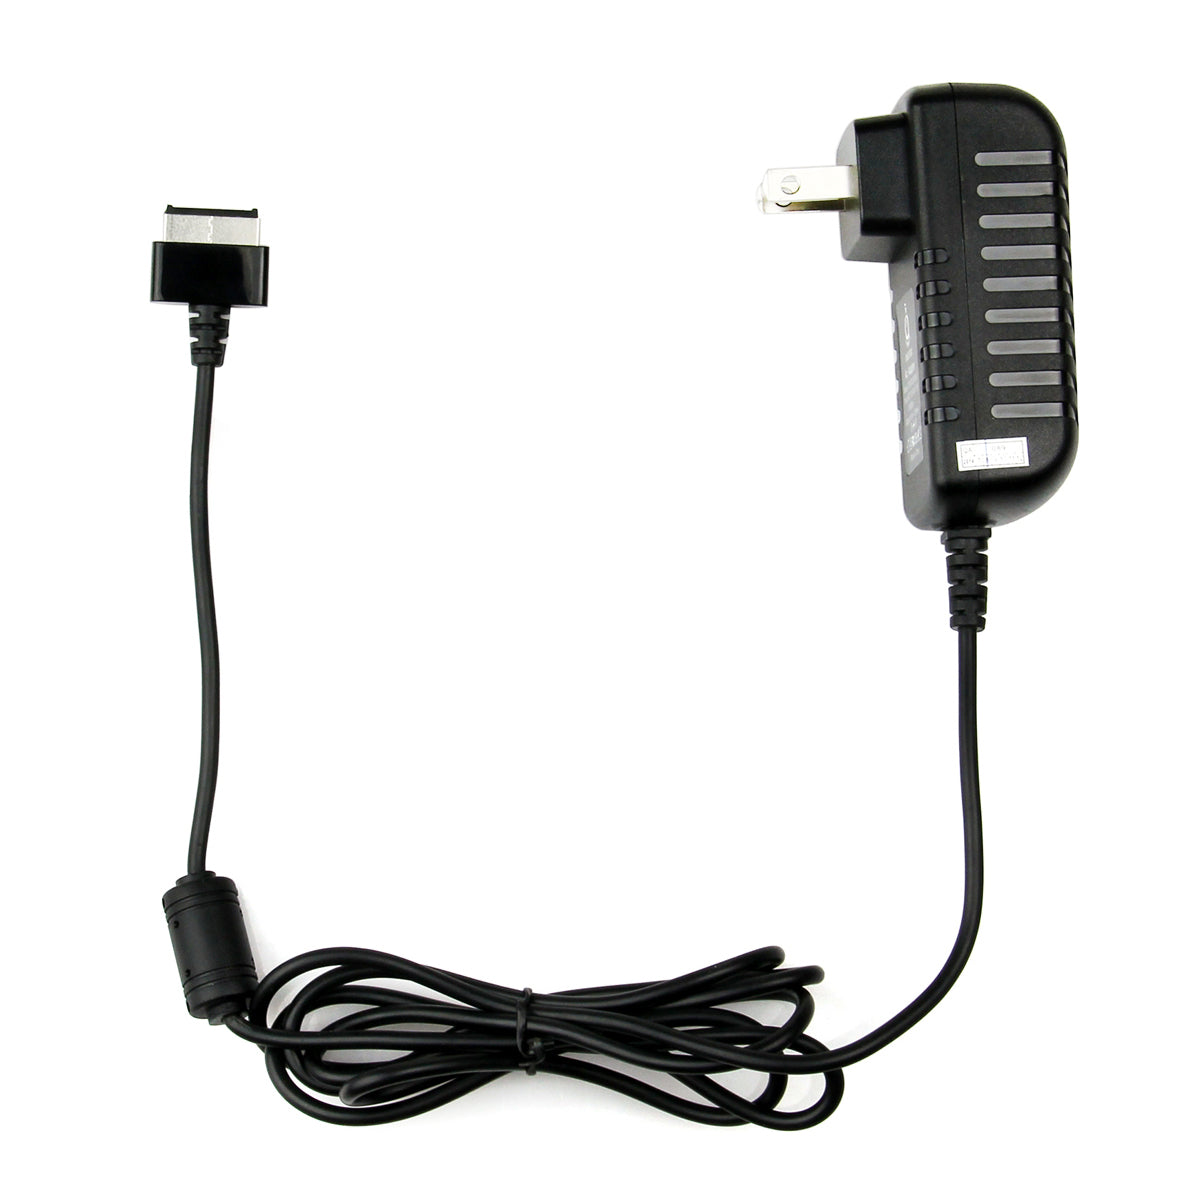 AC Adapter Charger for ASUS TF300TG Eee Pad.